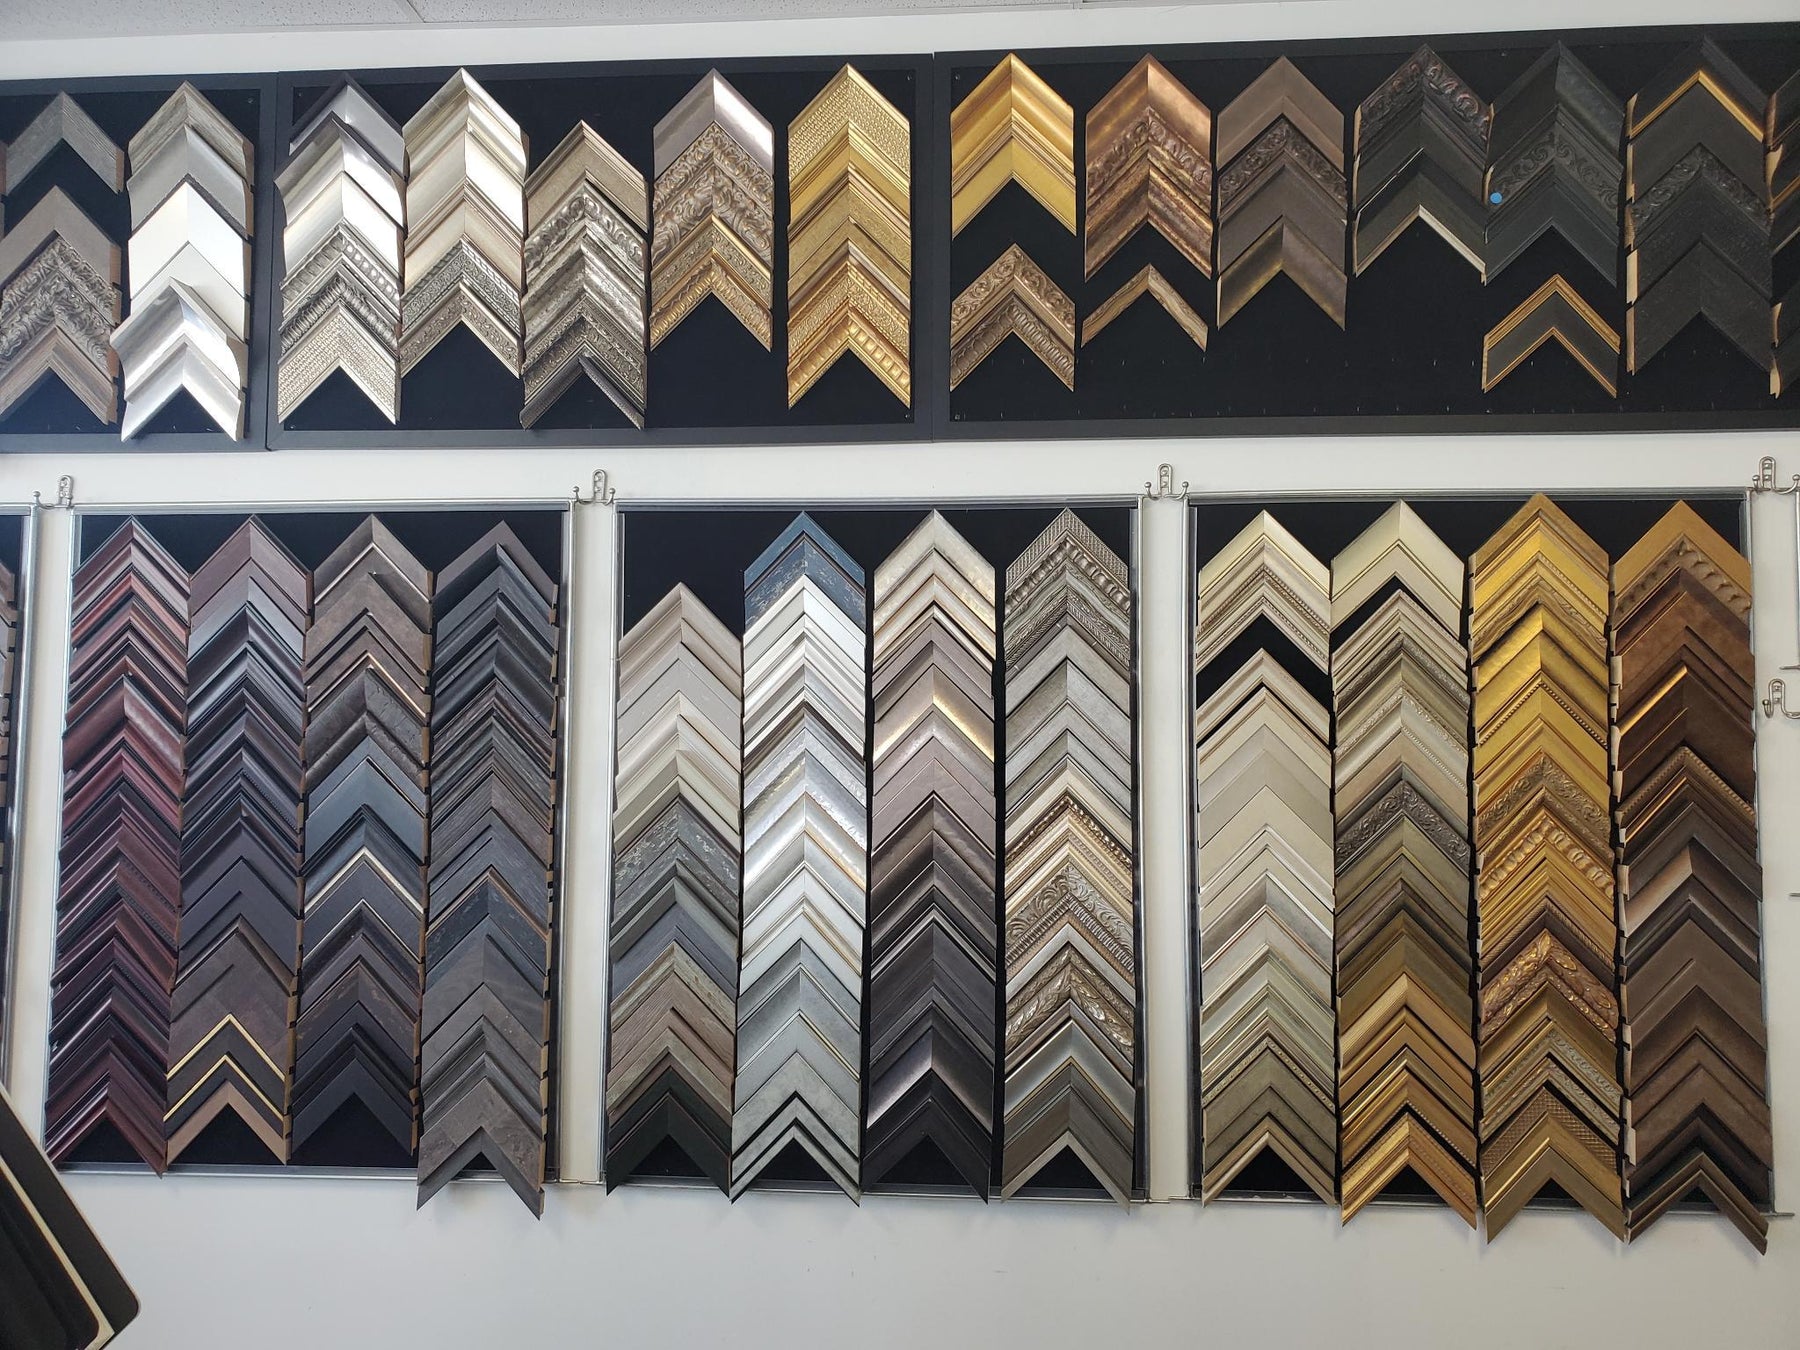 We offer a variety of custom picture frames